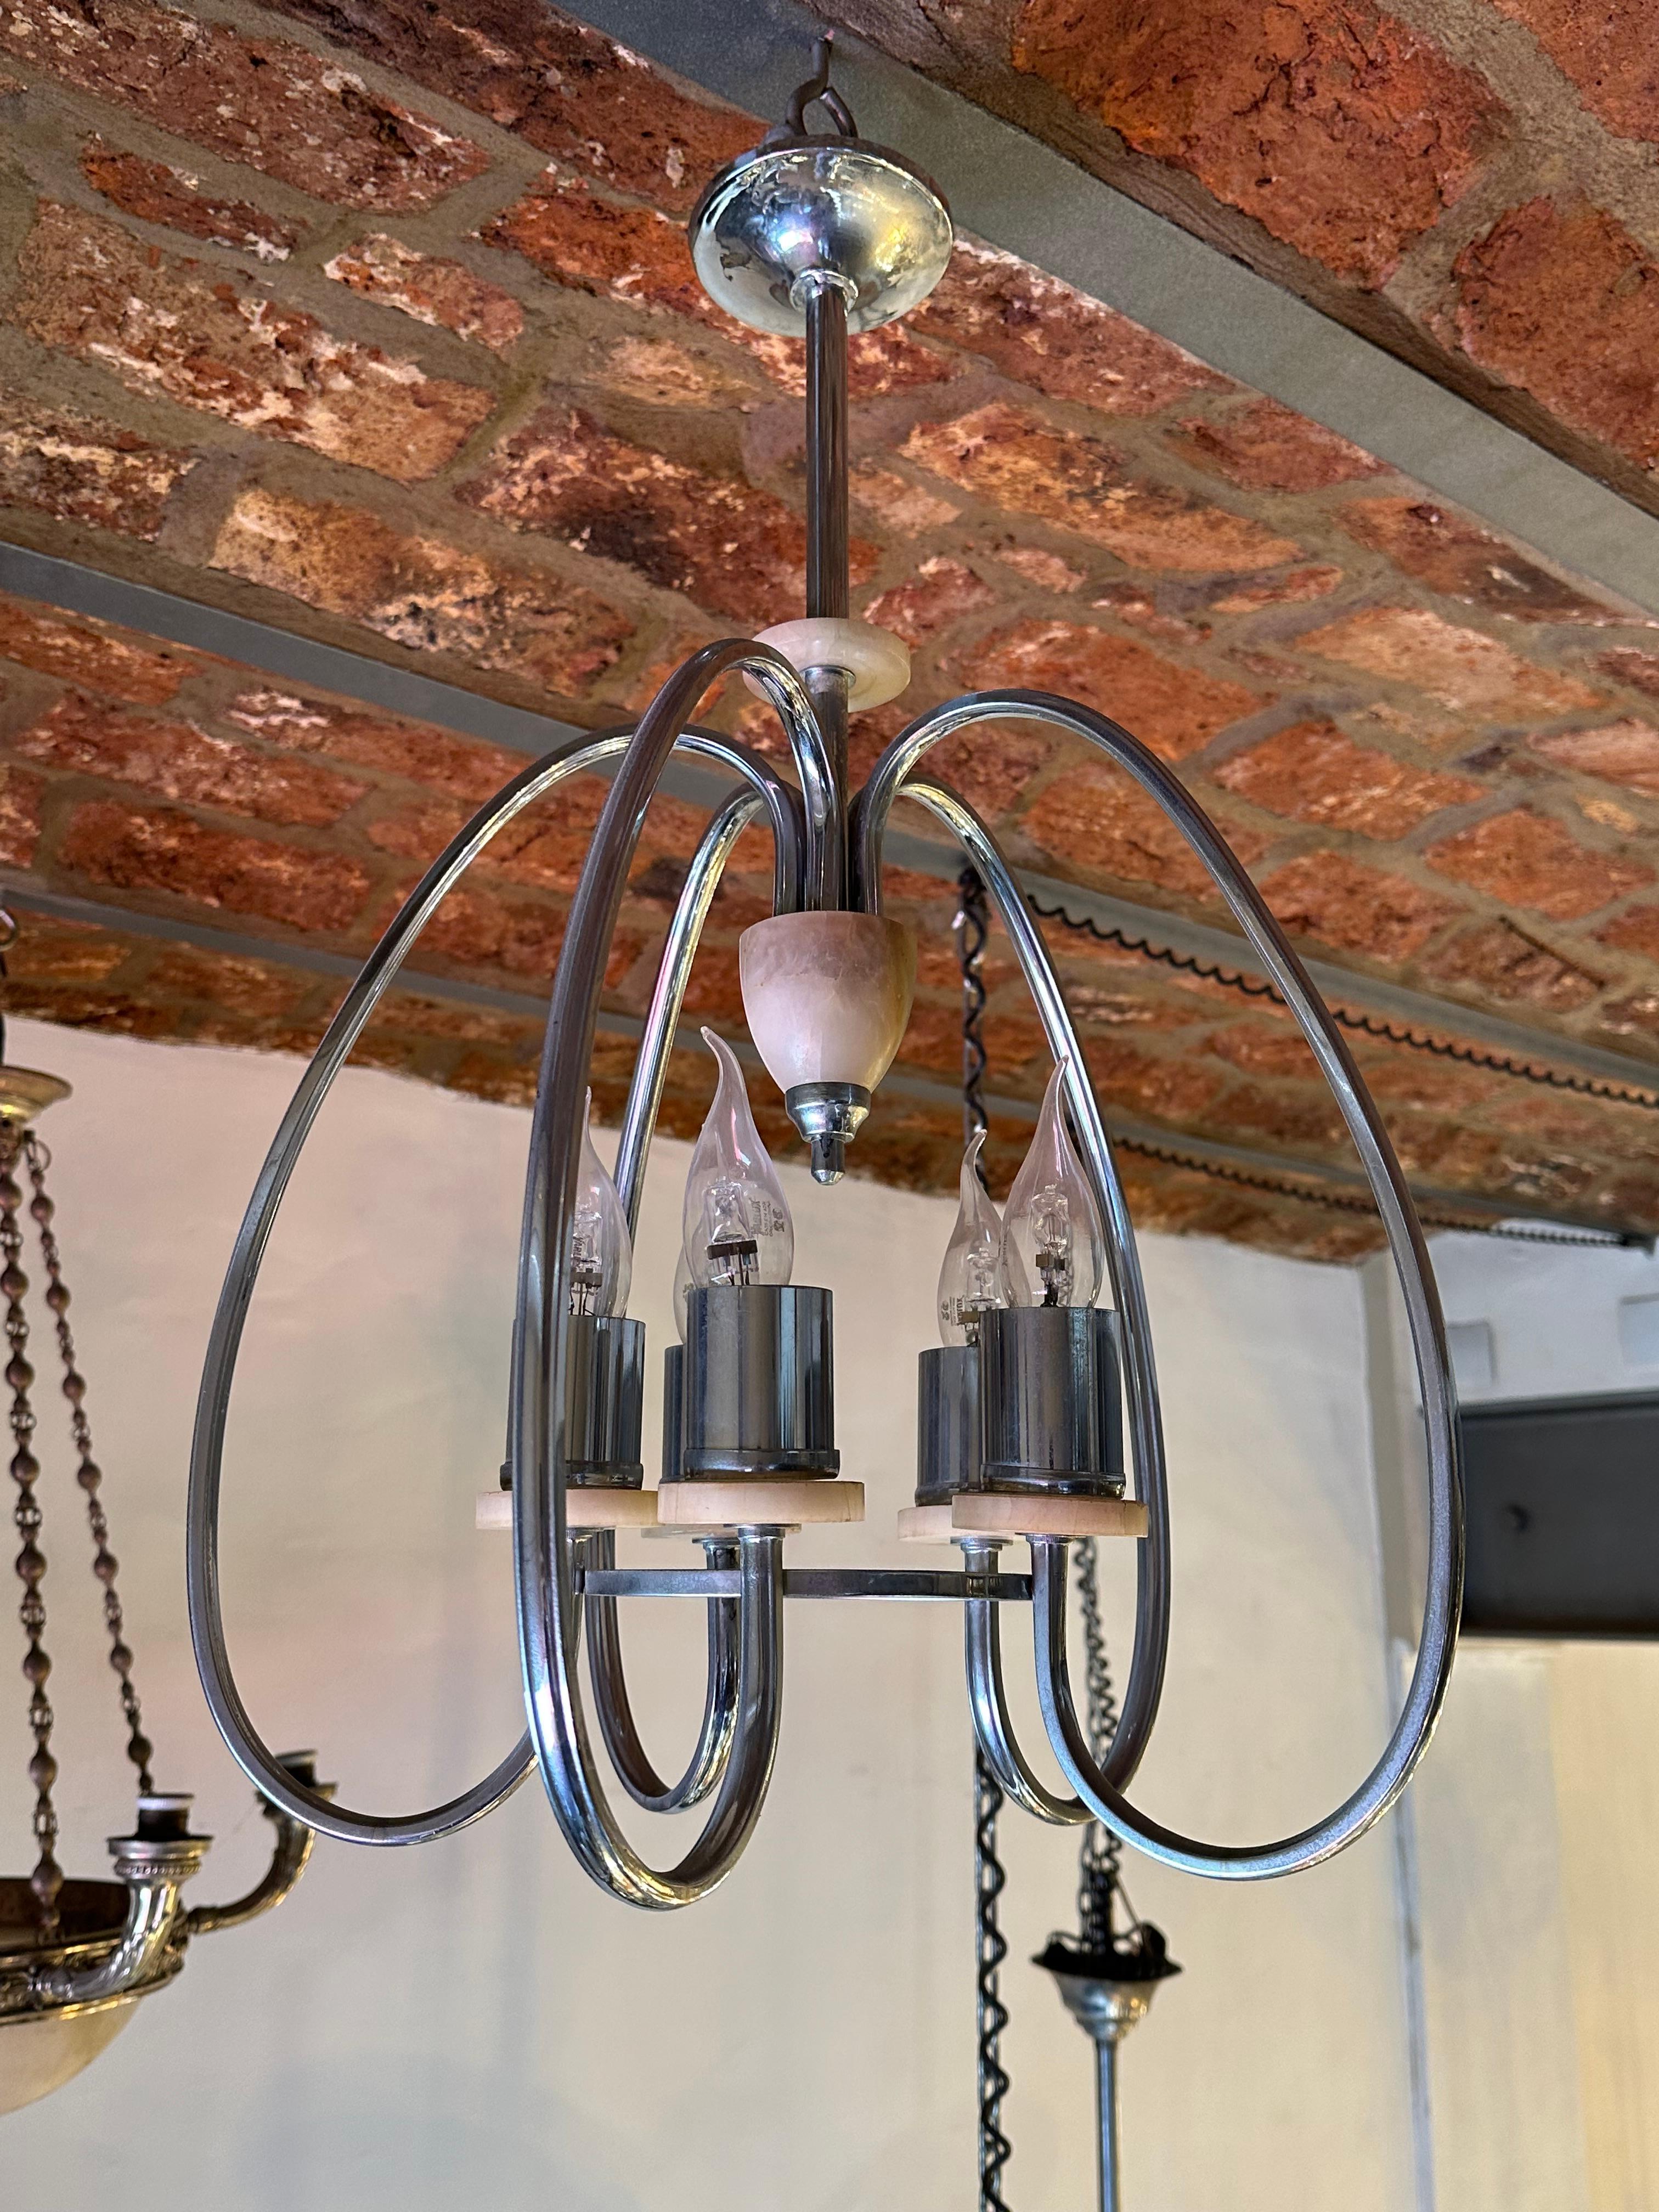 Hanging lamp.
Materials: chrome bronze and alabaster
Style: Art Deco
To take care of your property and the lives of our customers, the new wiring has been done.
We have specialized in the sale of Art Deco and Art Nouveau and Vintage styles since